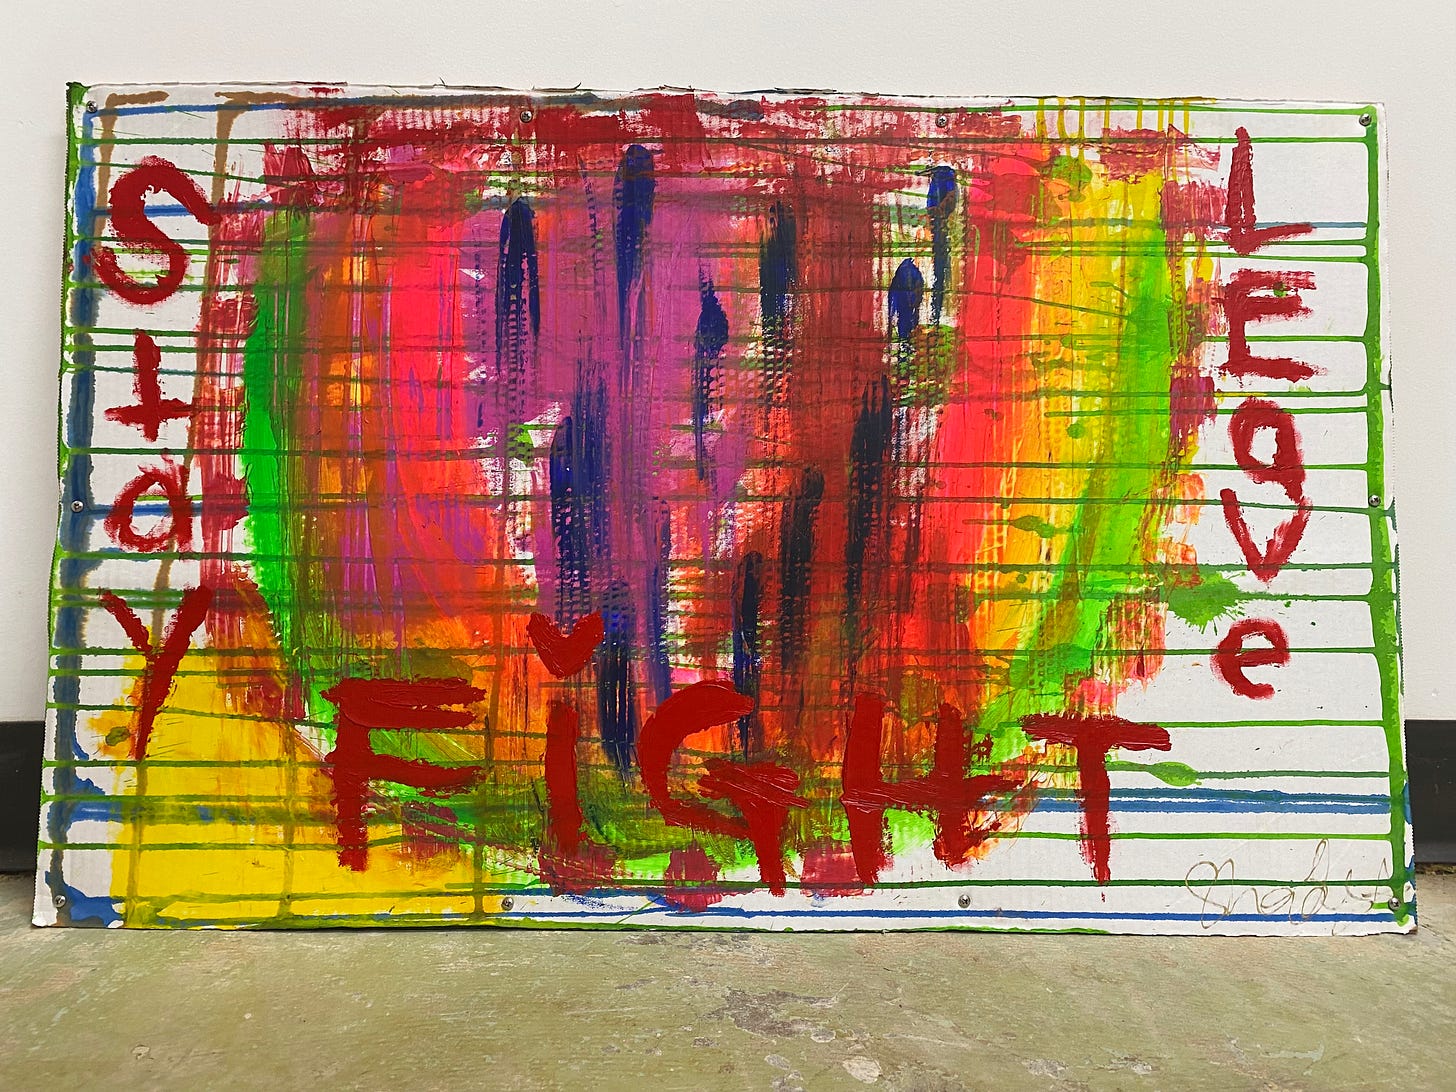 A finger painting on cardboard featuring the words "Stay, fight, leave" and a watermelon with a rainbow rind.